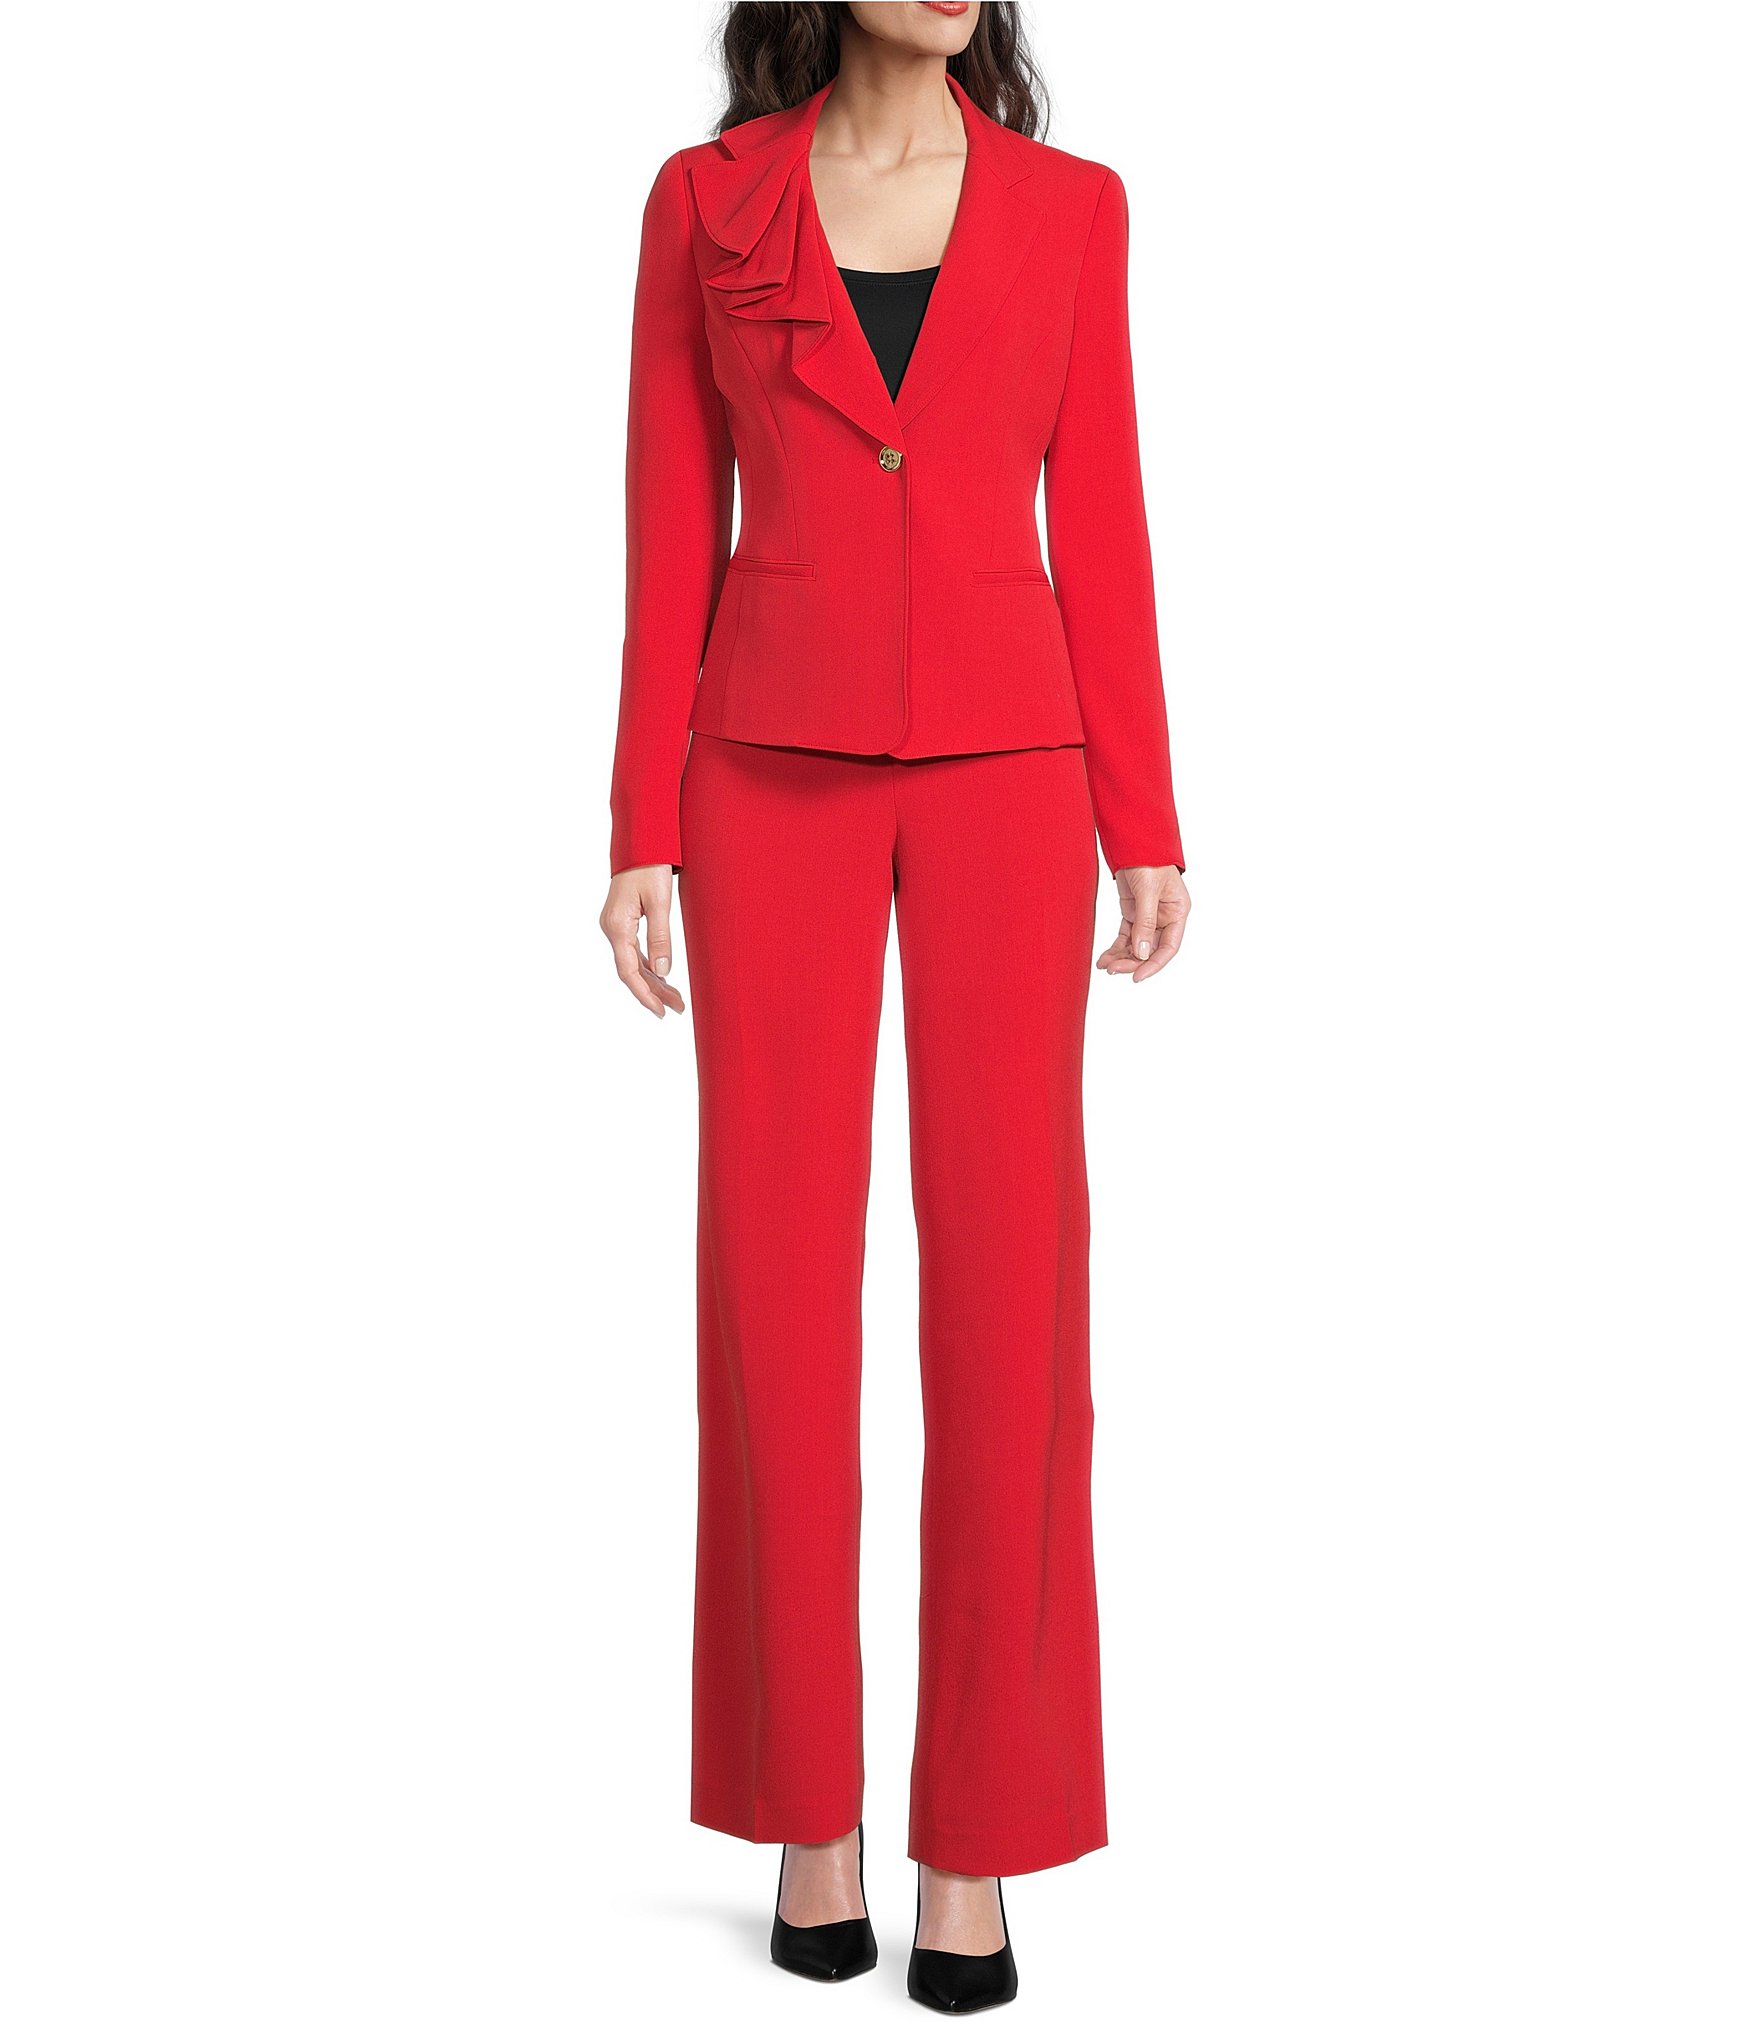 Red Dressy Suits For Women